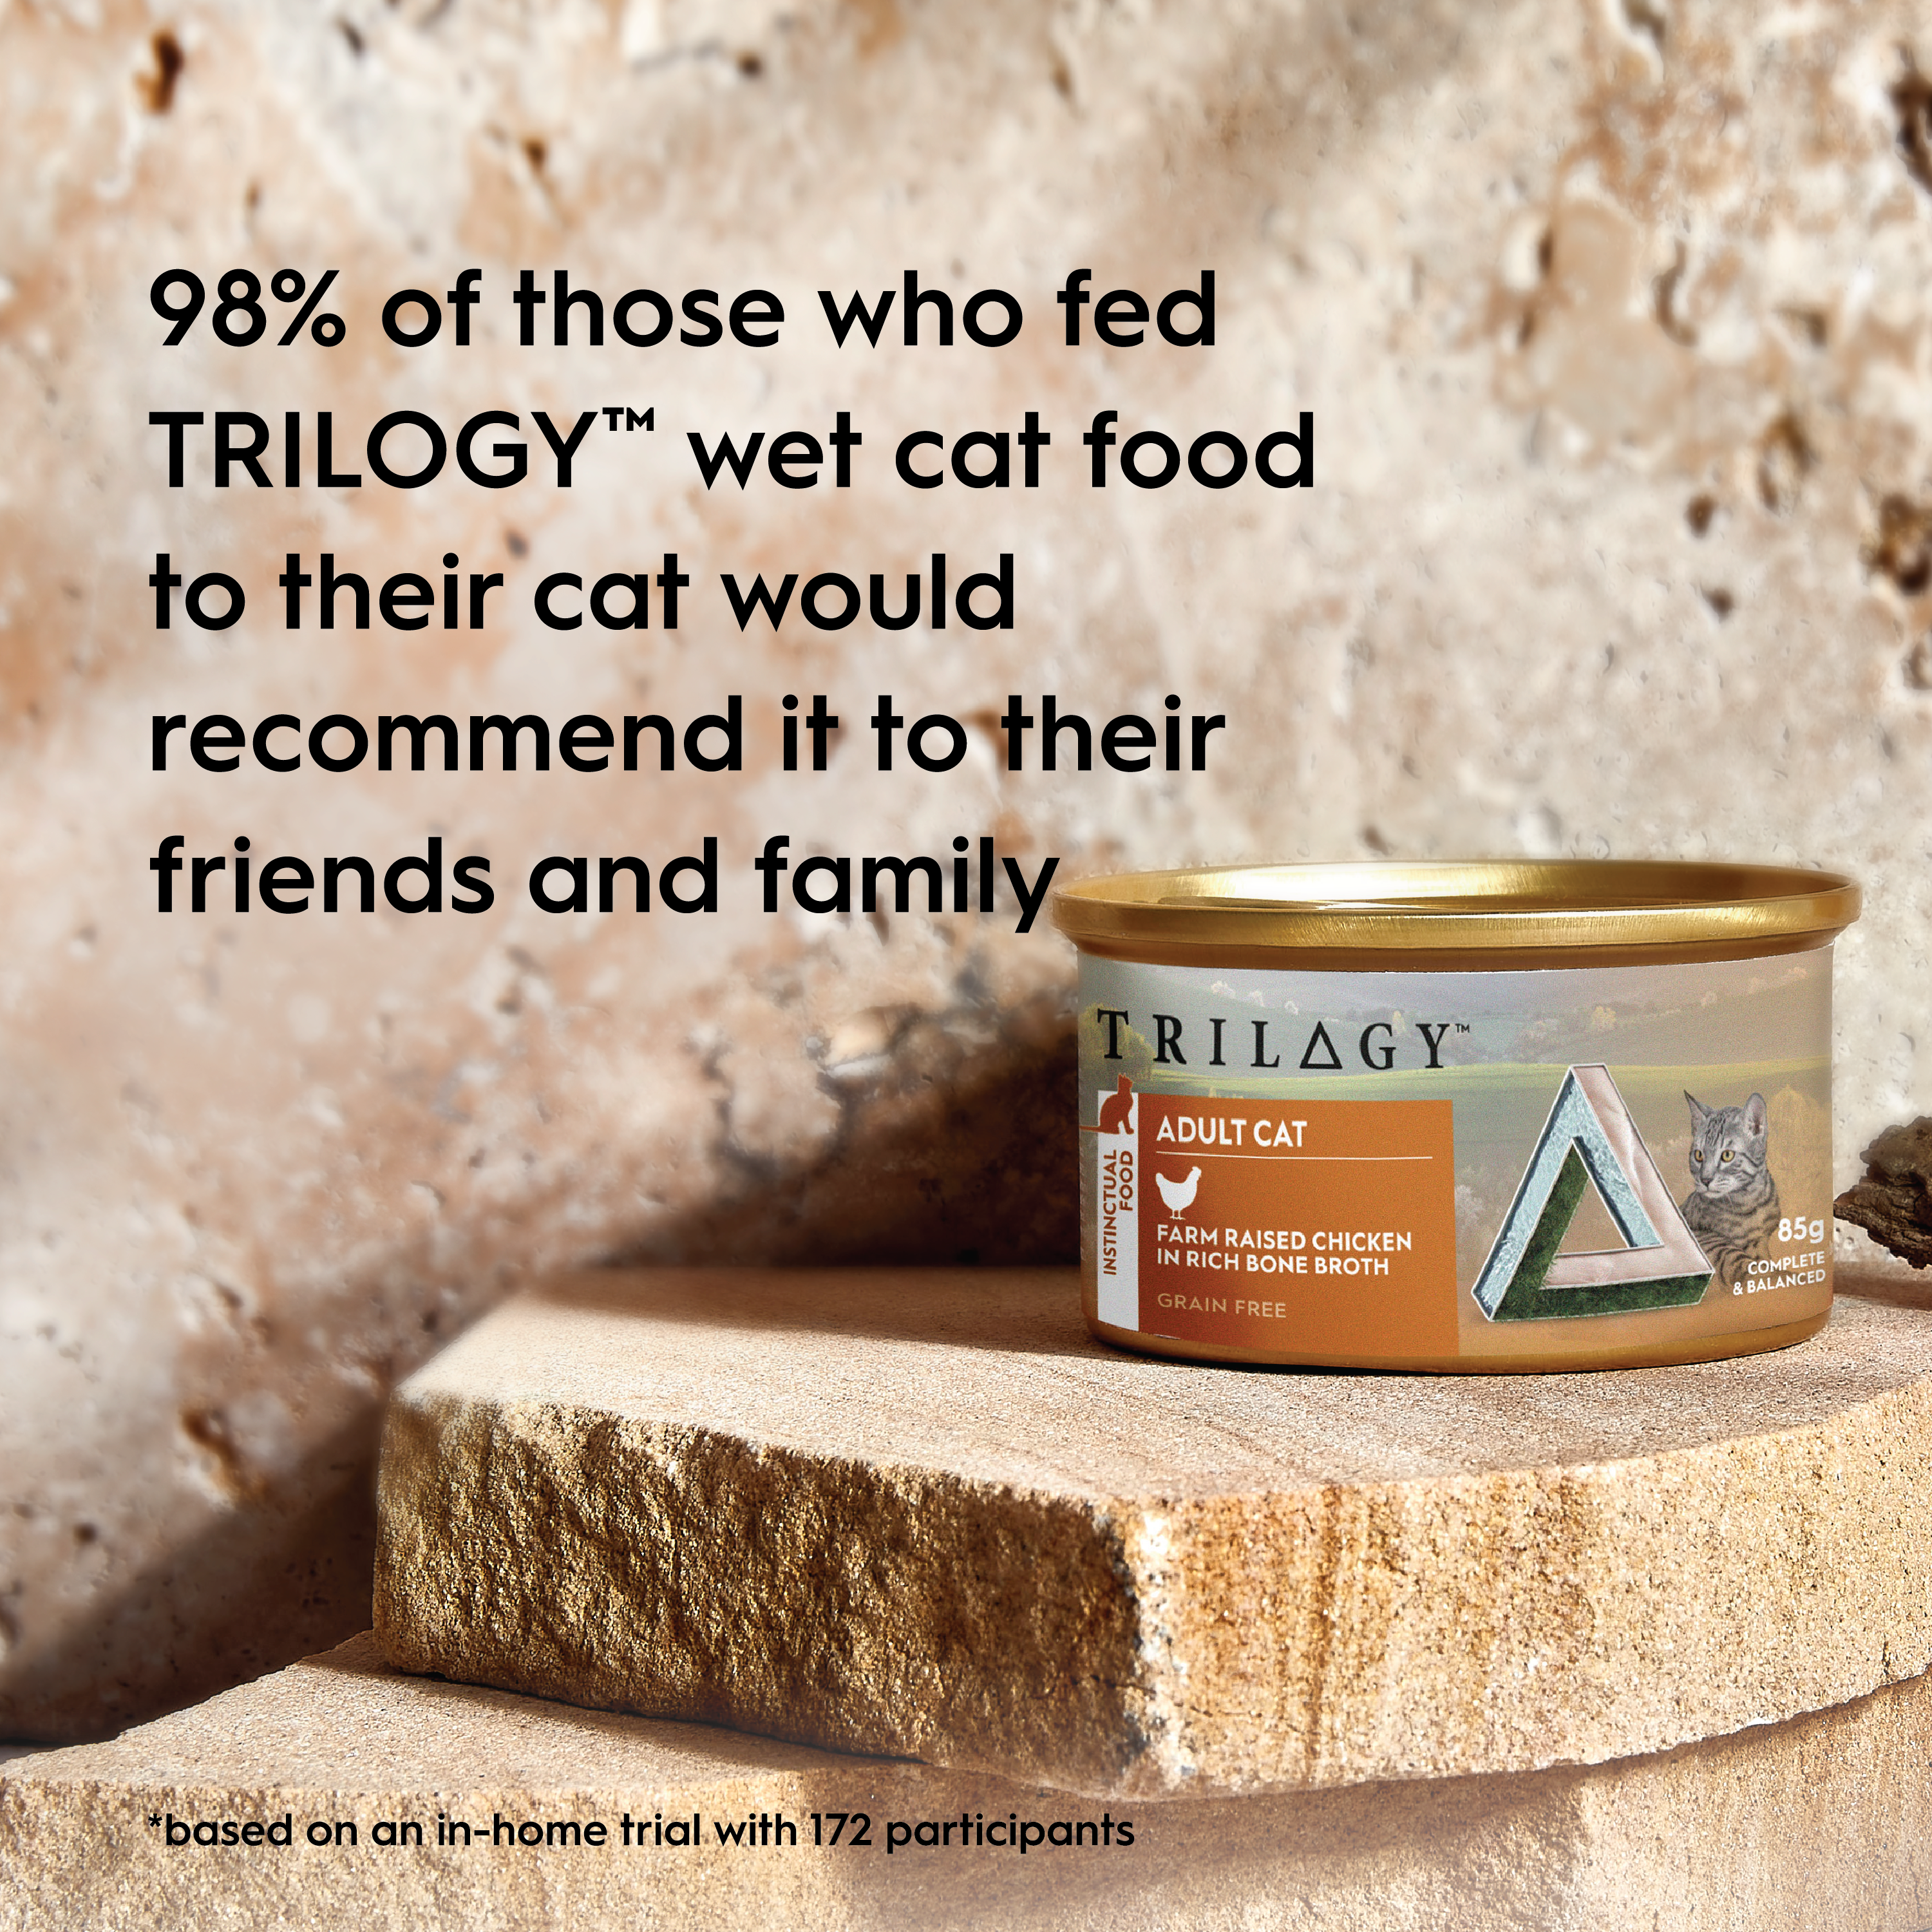 TRILOGY™ ADULT HYDRATING PROTEIN MOUSSE WILD CAUGHT TUNA 85G